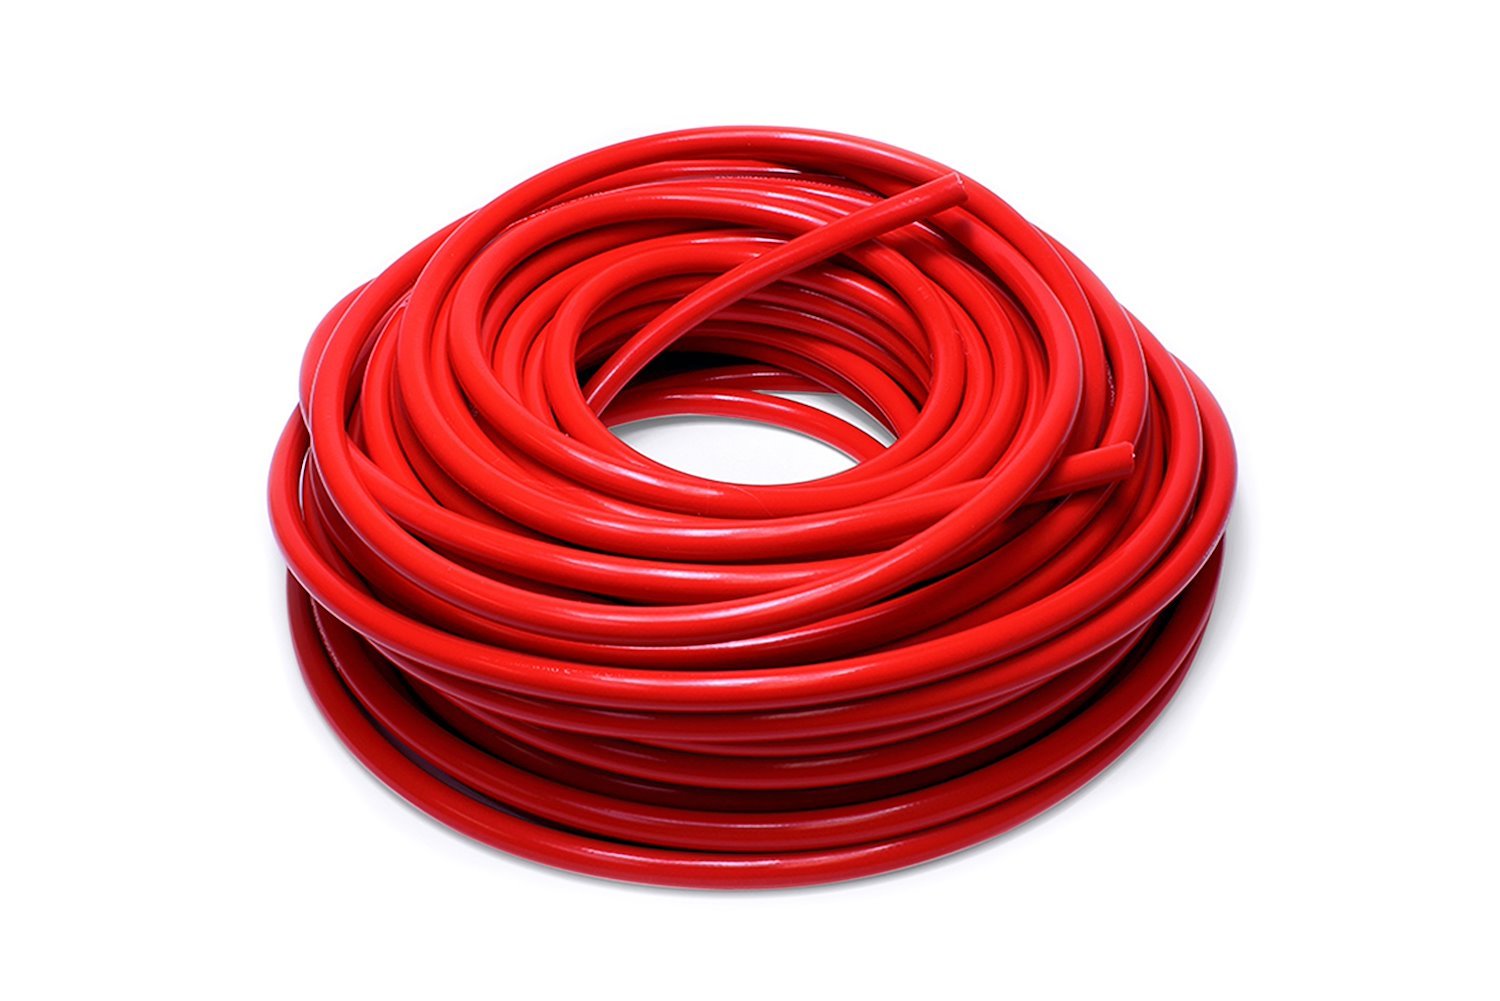 HTHH-025-REDx25 Silicone Heater Hose Tubing, High-Temp 1-Ply Reinforced, 1/4 in. ID, 25 ft. Roll, Red